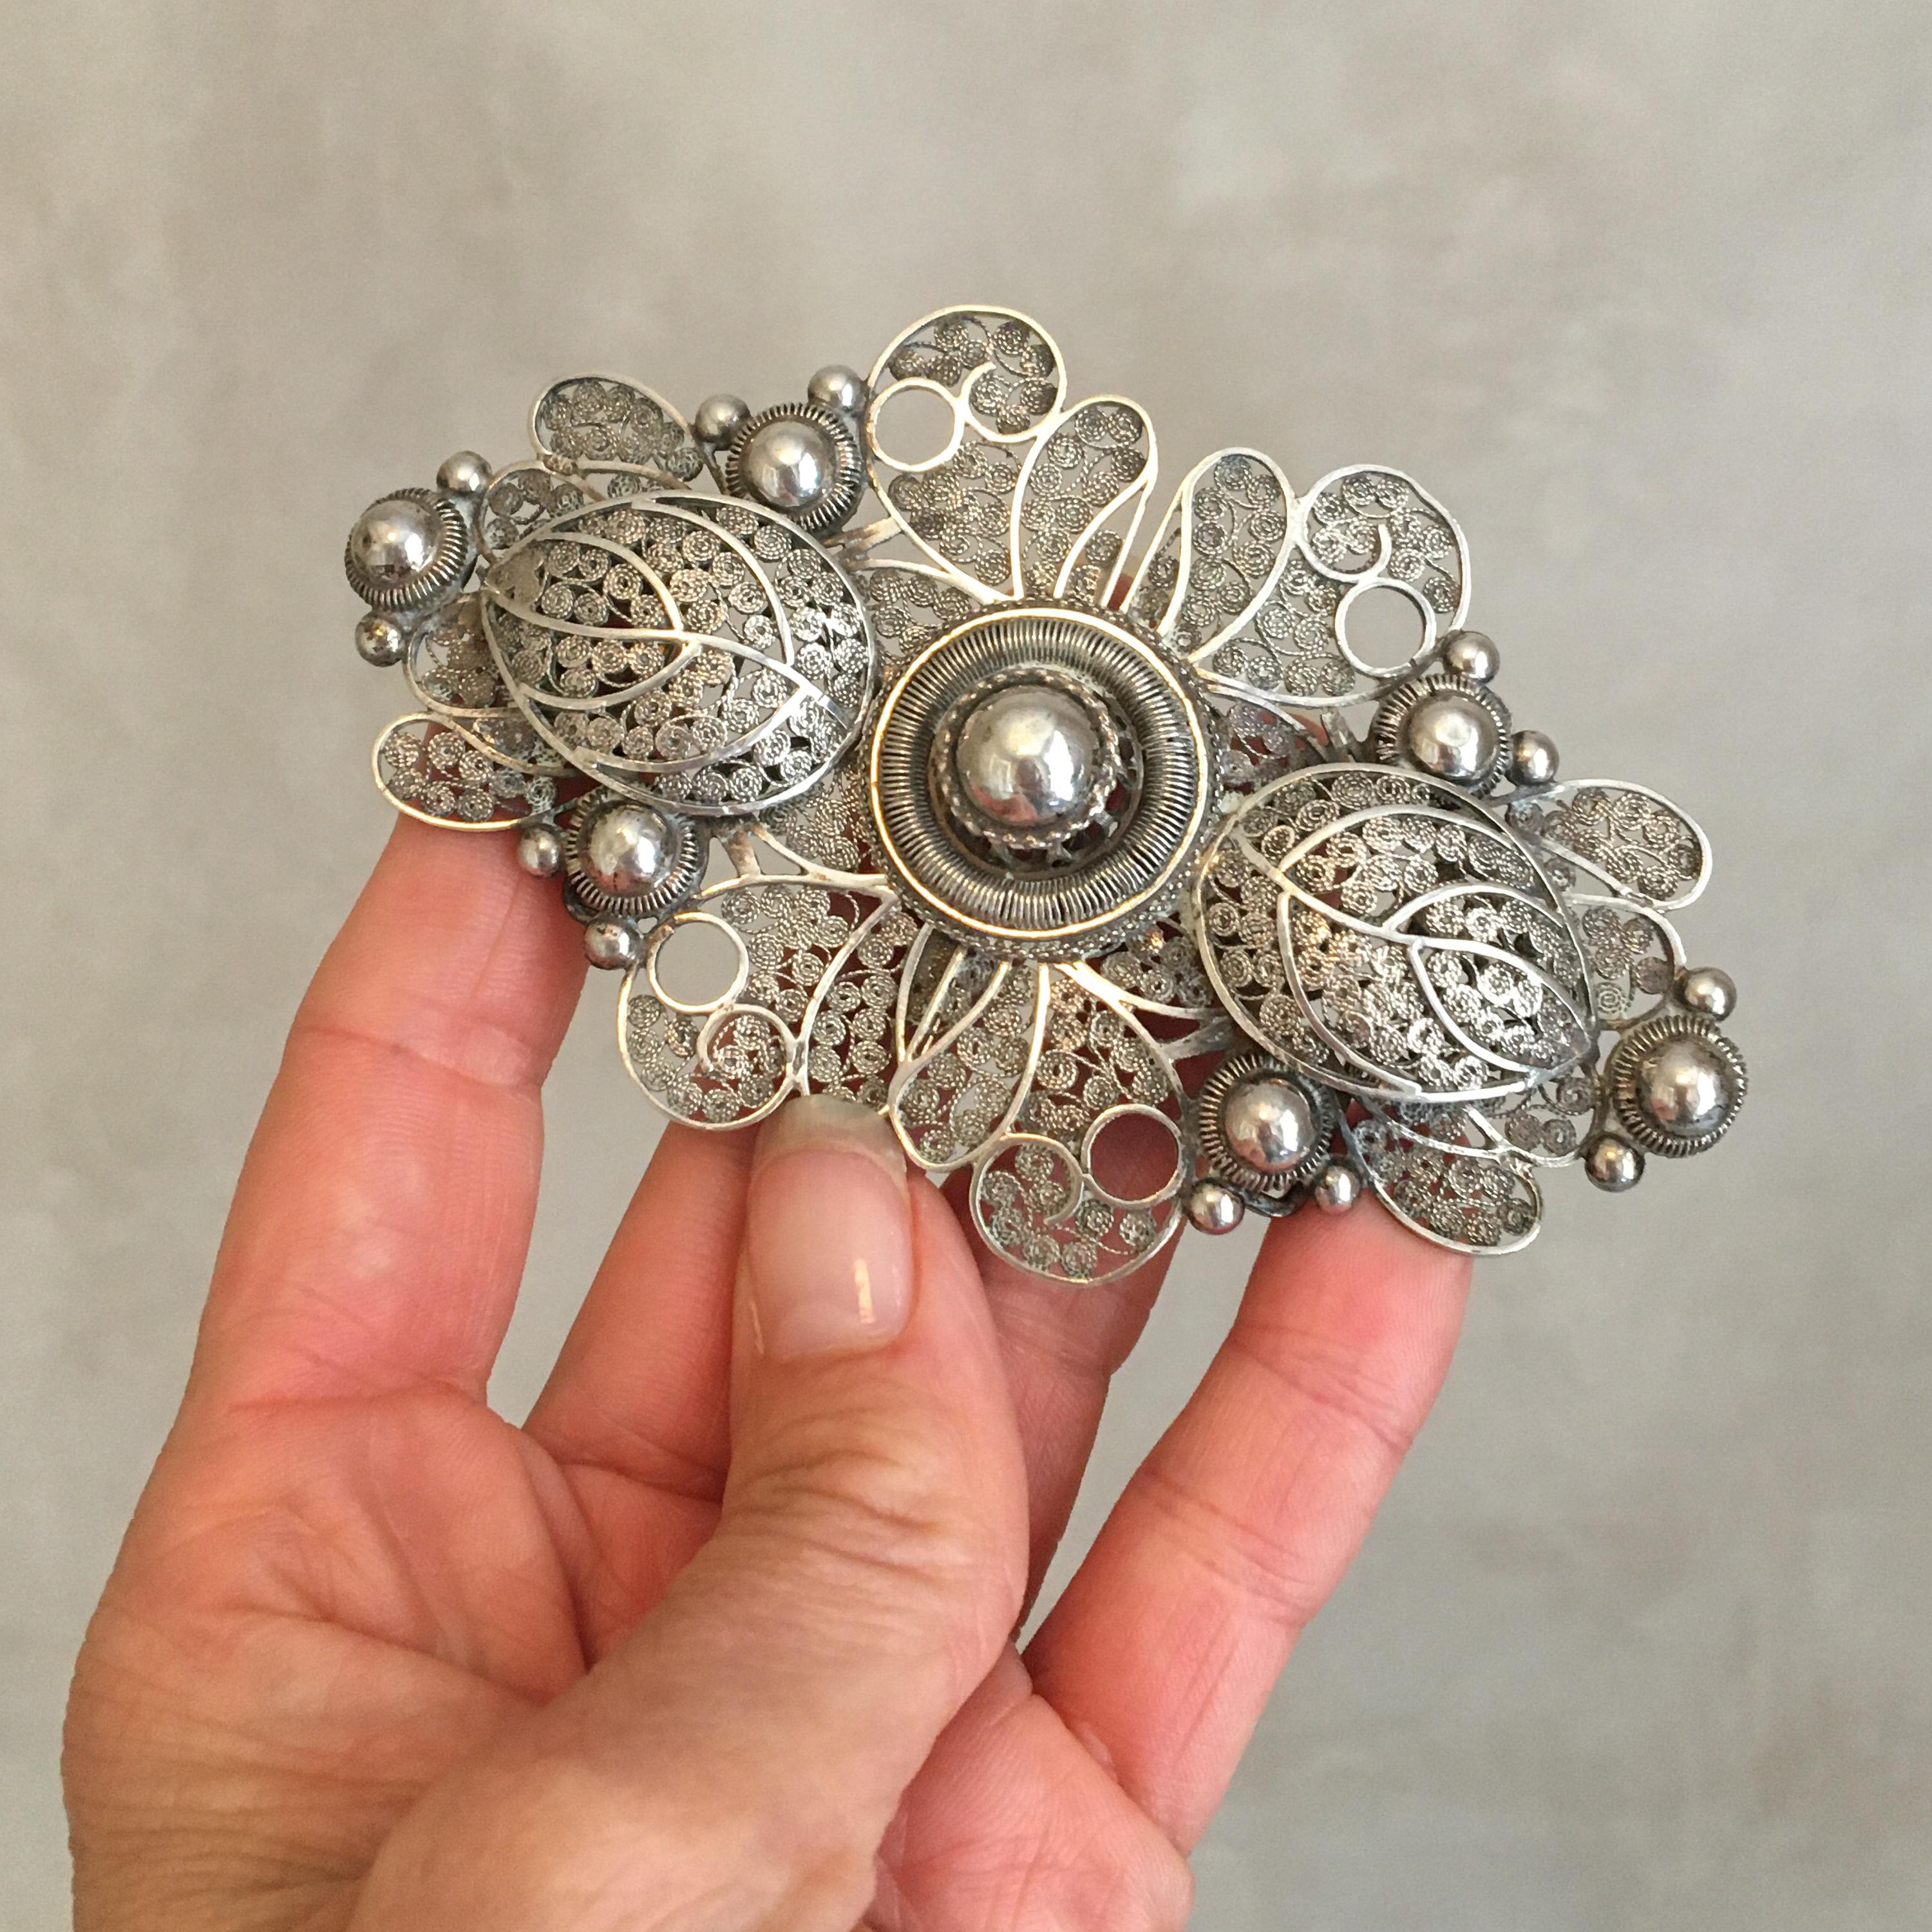 This Art Nouveau belt buckle is made out of silver which shows a beautiful opulent presentation. The buckle has a scrolling foliage openwork design, depicting leaves and spheres. The buckle is stamped with the Dutch old sword hallmark (1910-1921)